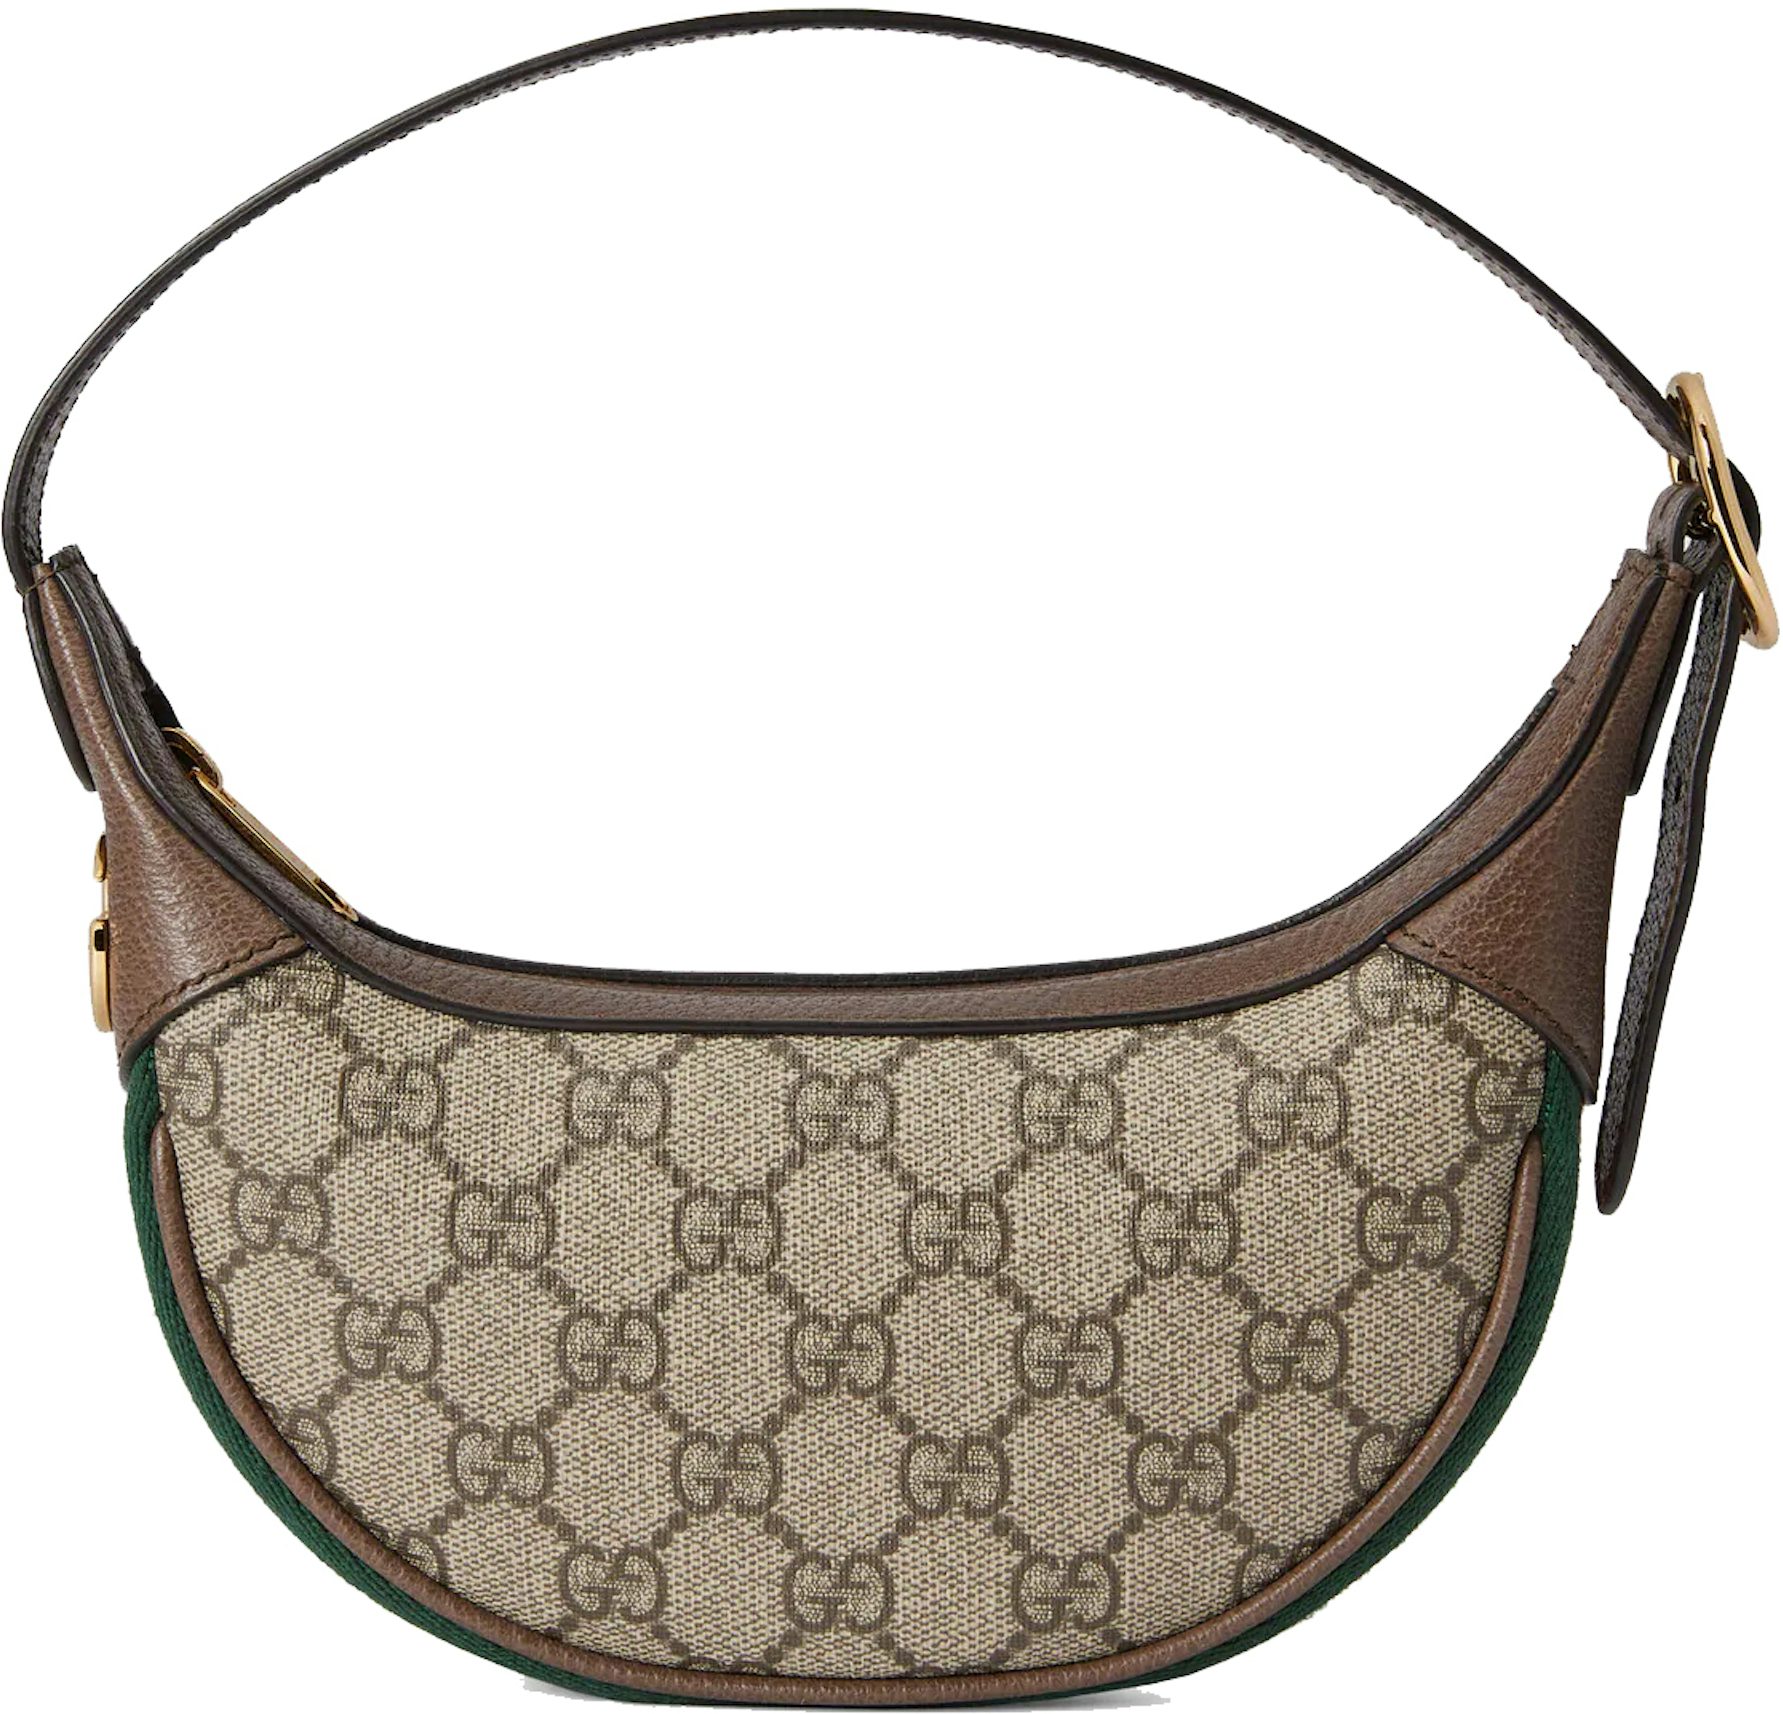 Ophidia GG small shoulder bag in beige and ebony GG Supreme